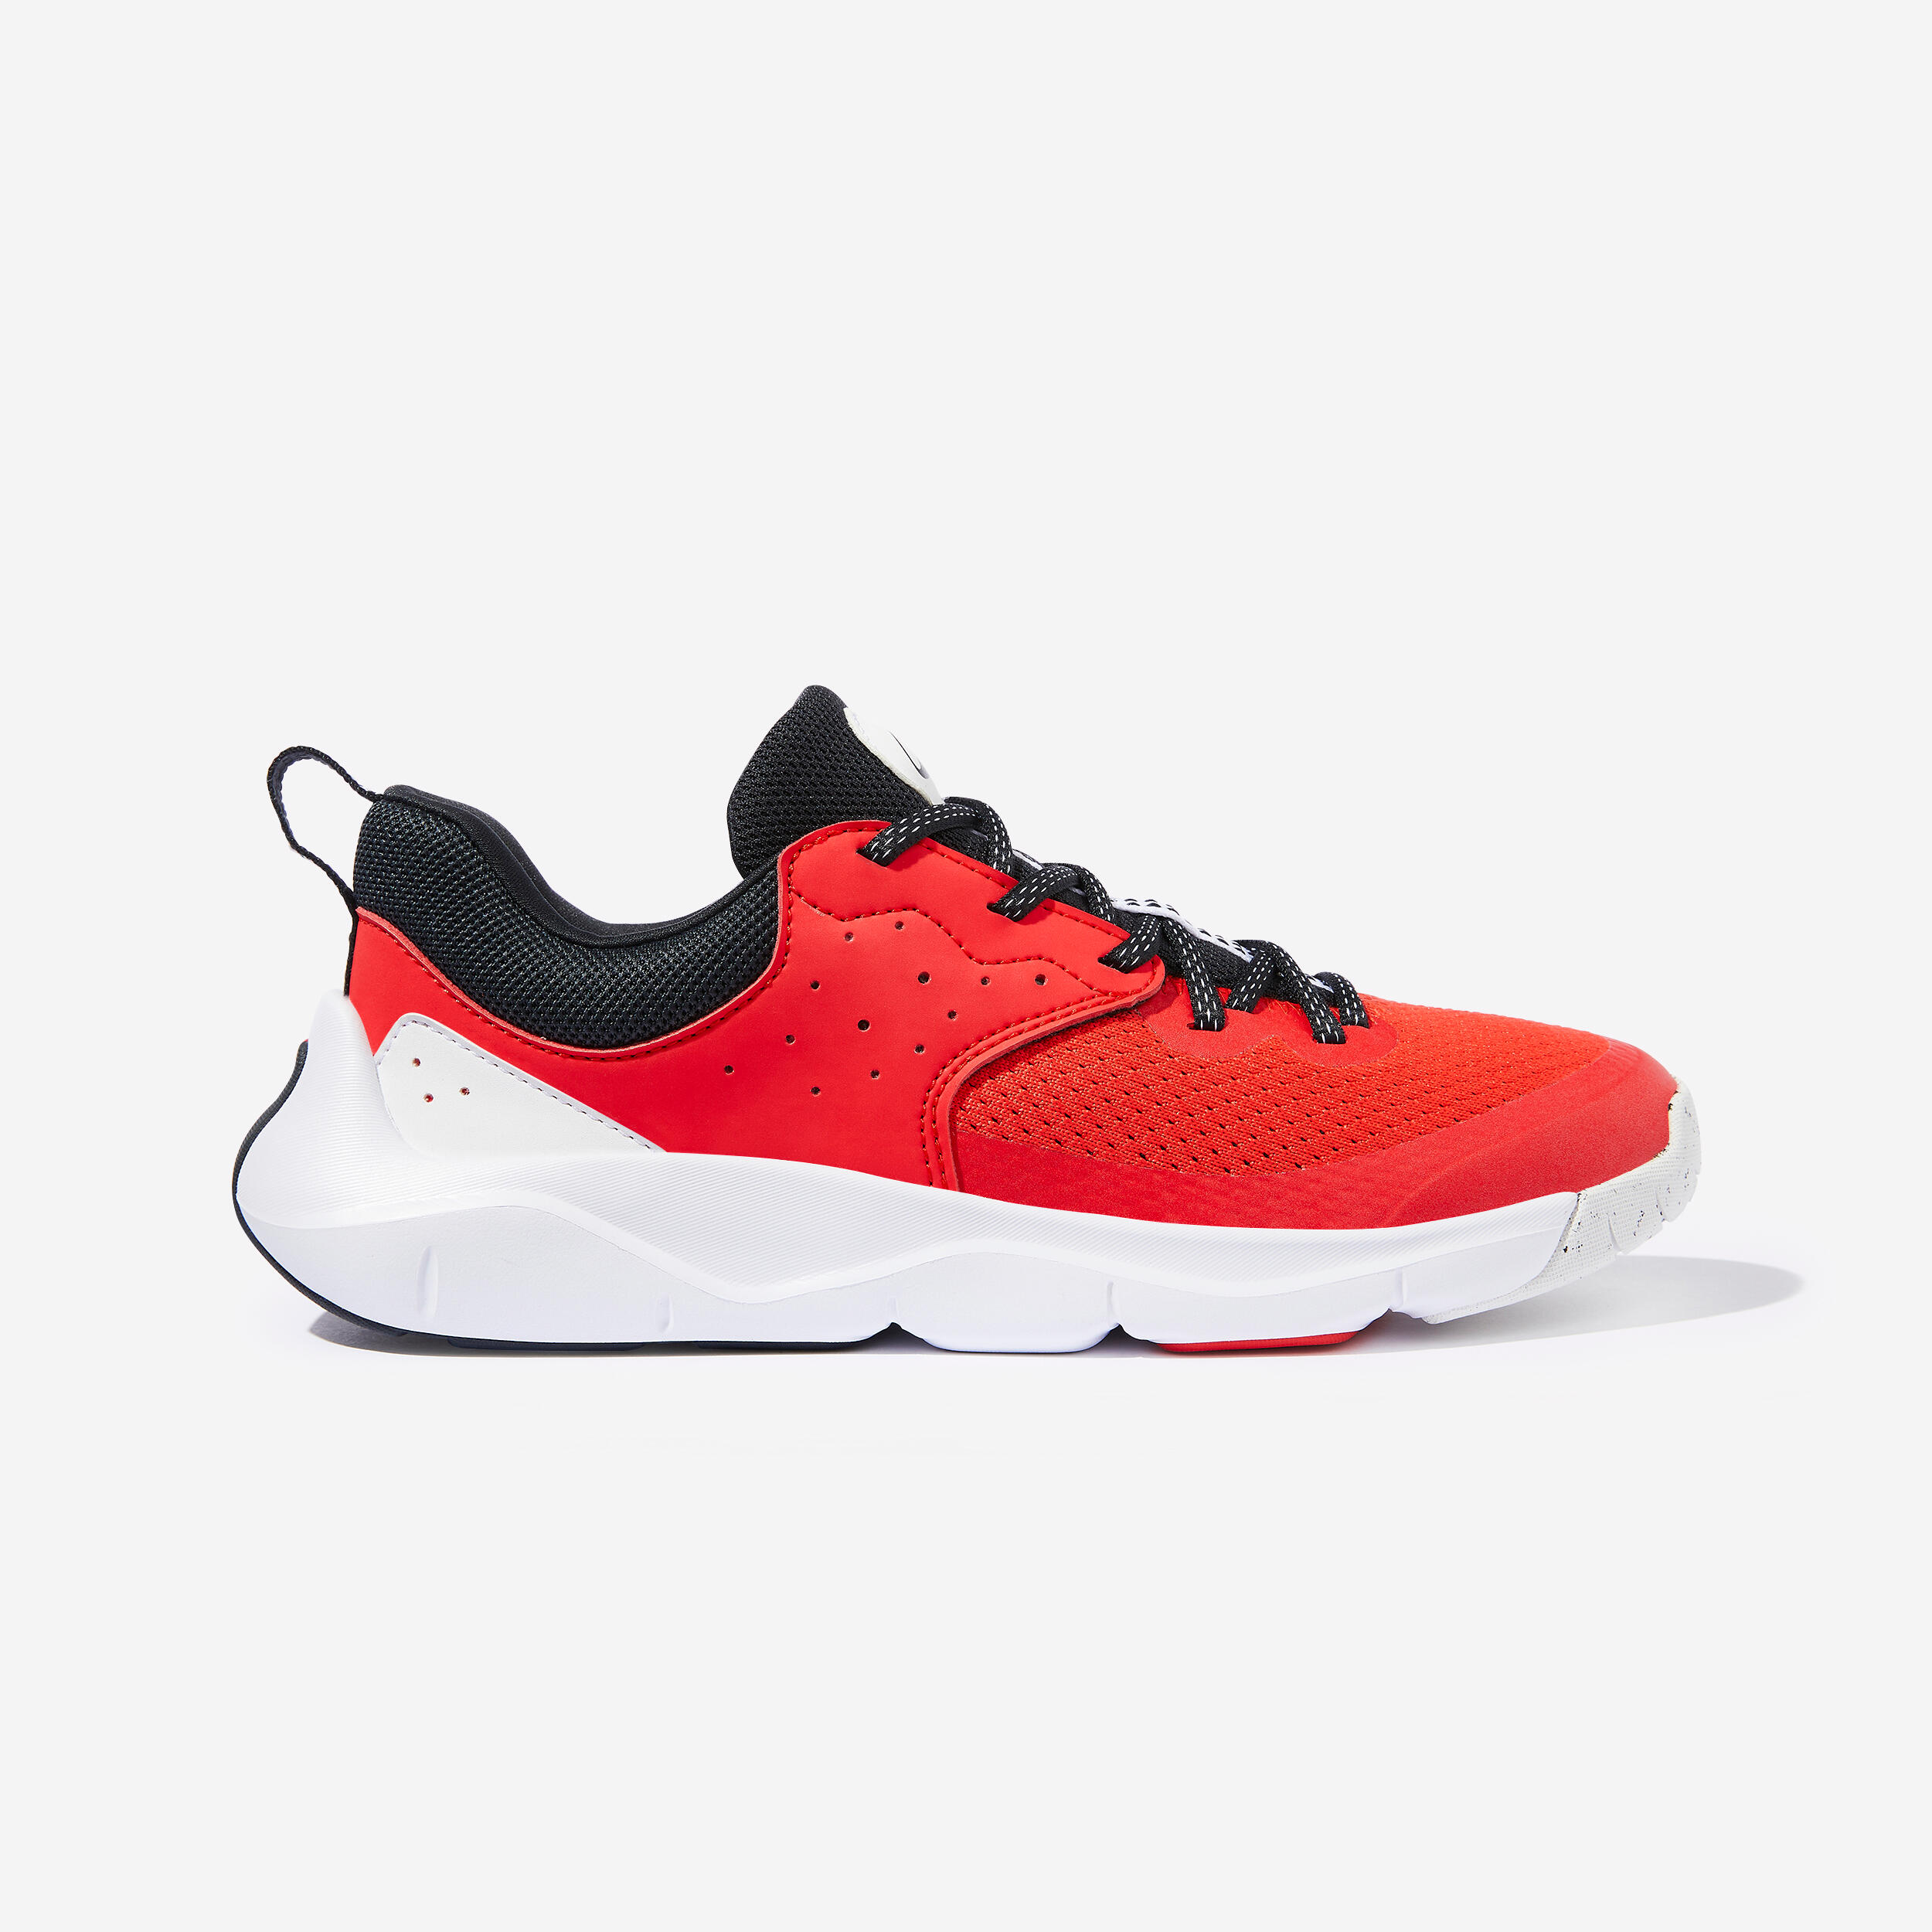 fluo electric red / graphite grey / ultra white